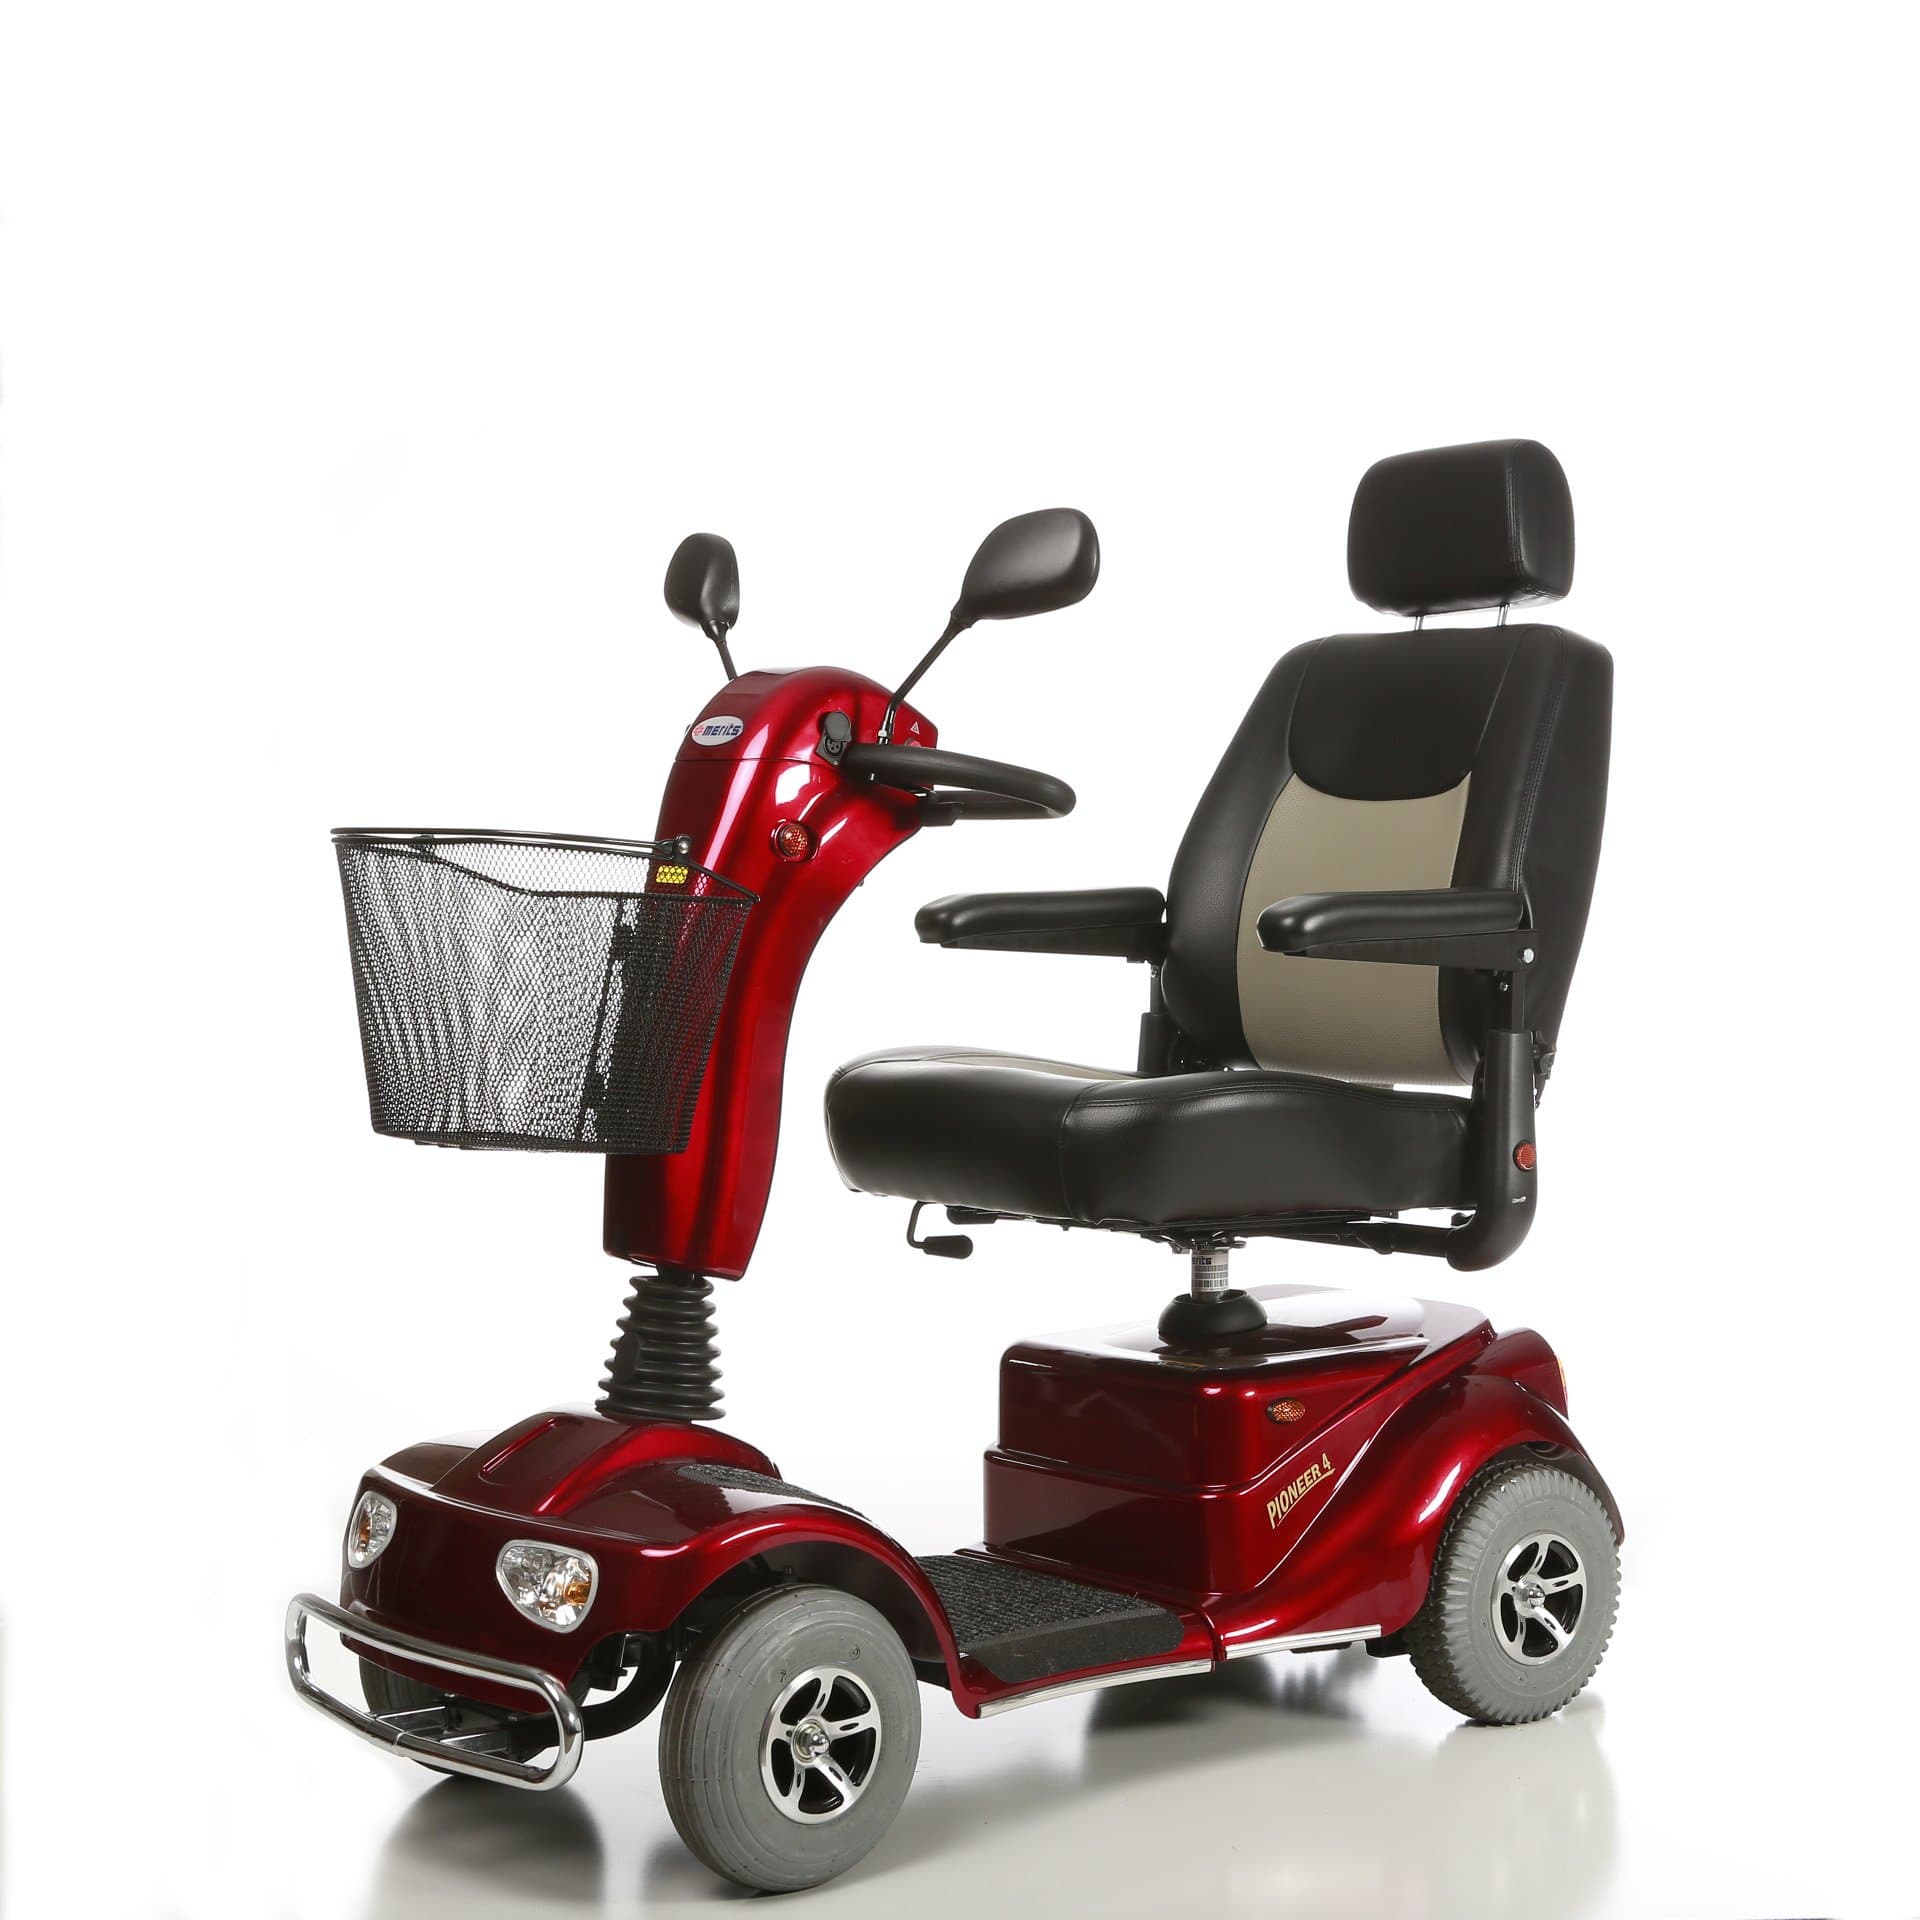 Merits Health Pioneer 4 12V/34Ah 250W 4-Wheel Mobility Scooter S141